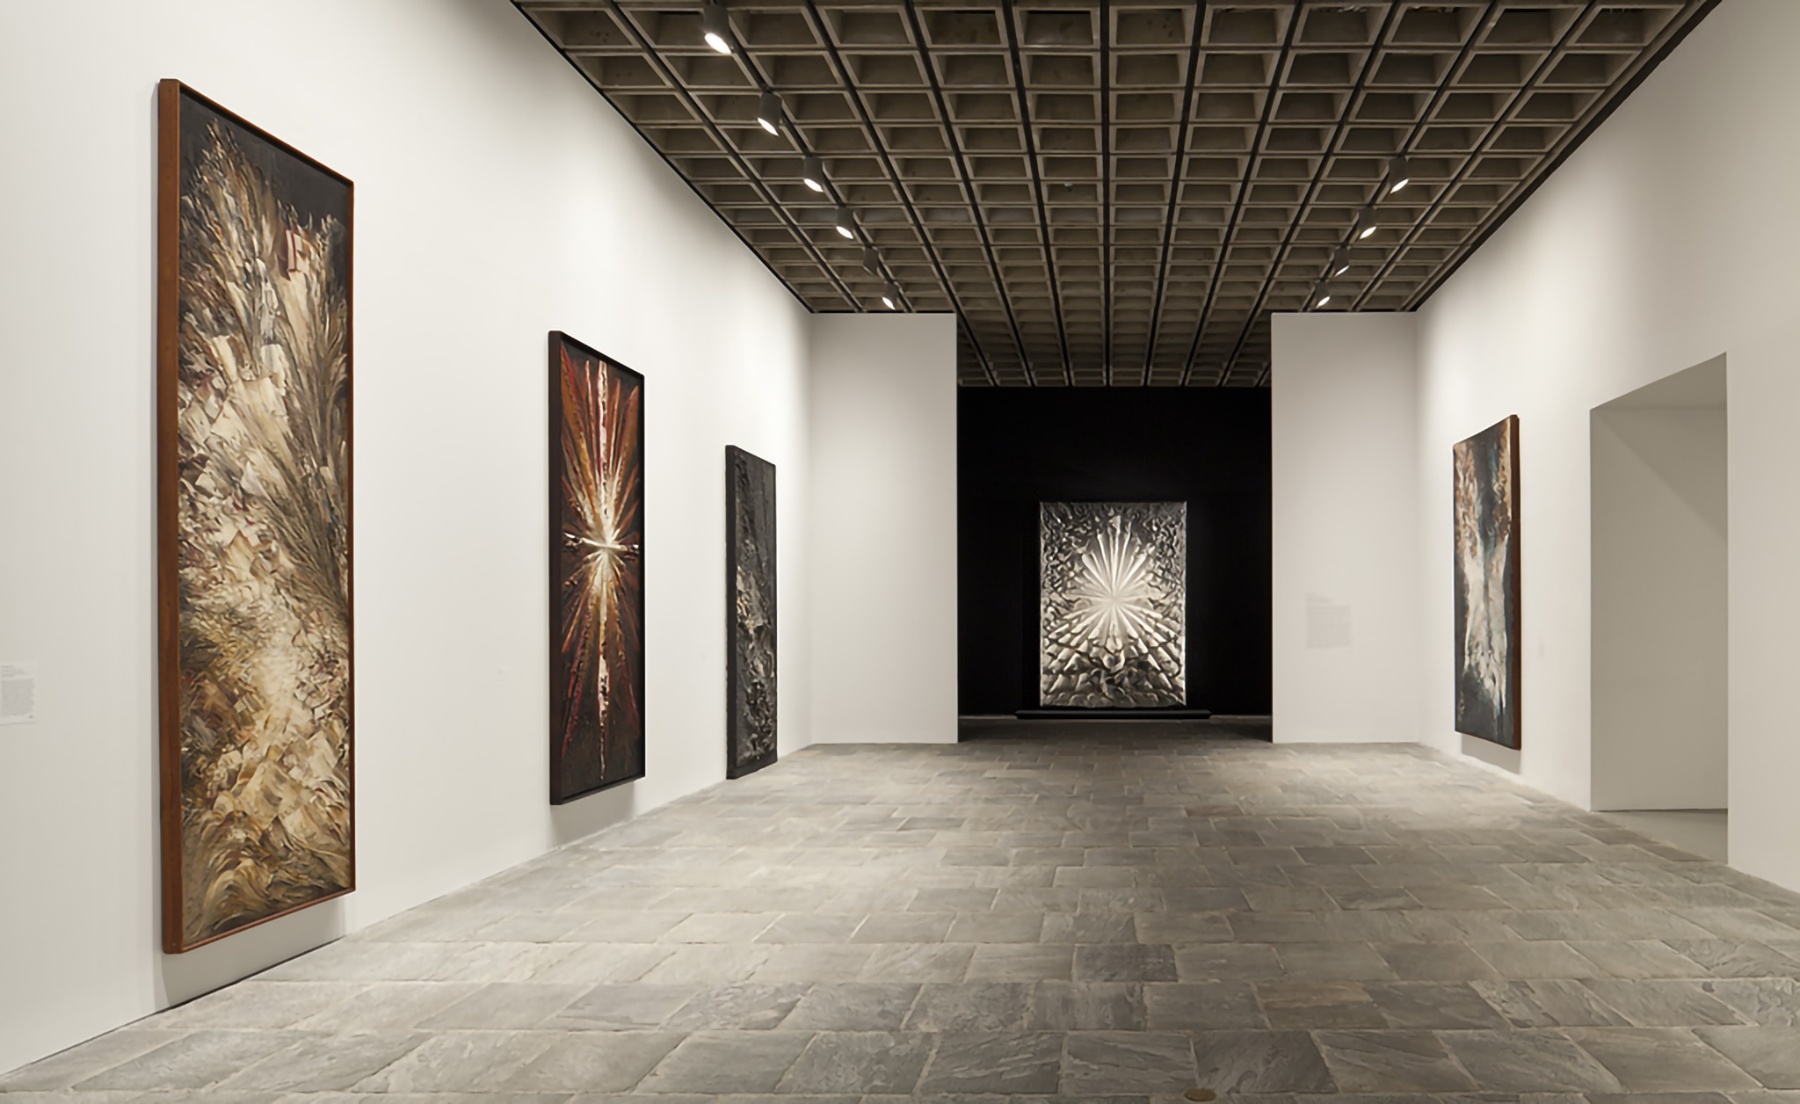 Sheldan Collins, Installation view of Jay DeFeo: A Retrospective at the Whitney Museum of American Art, New York, 2013